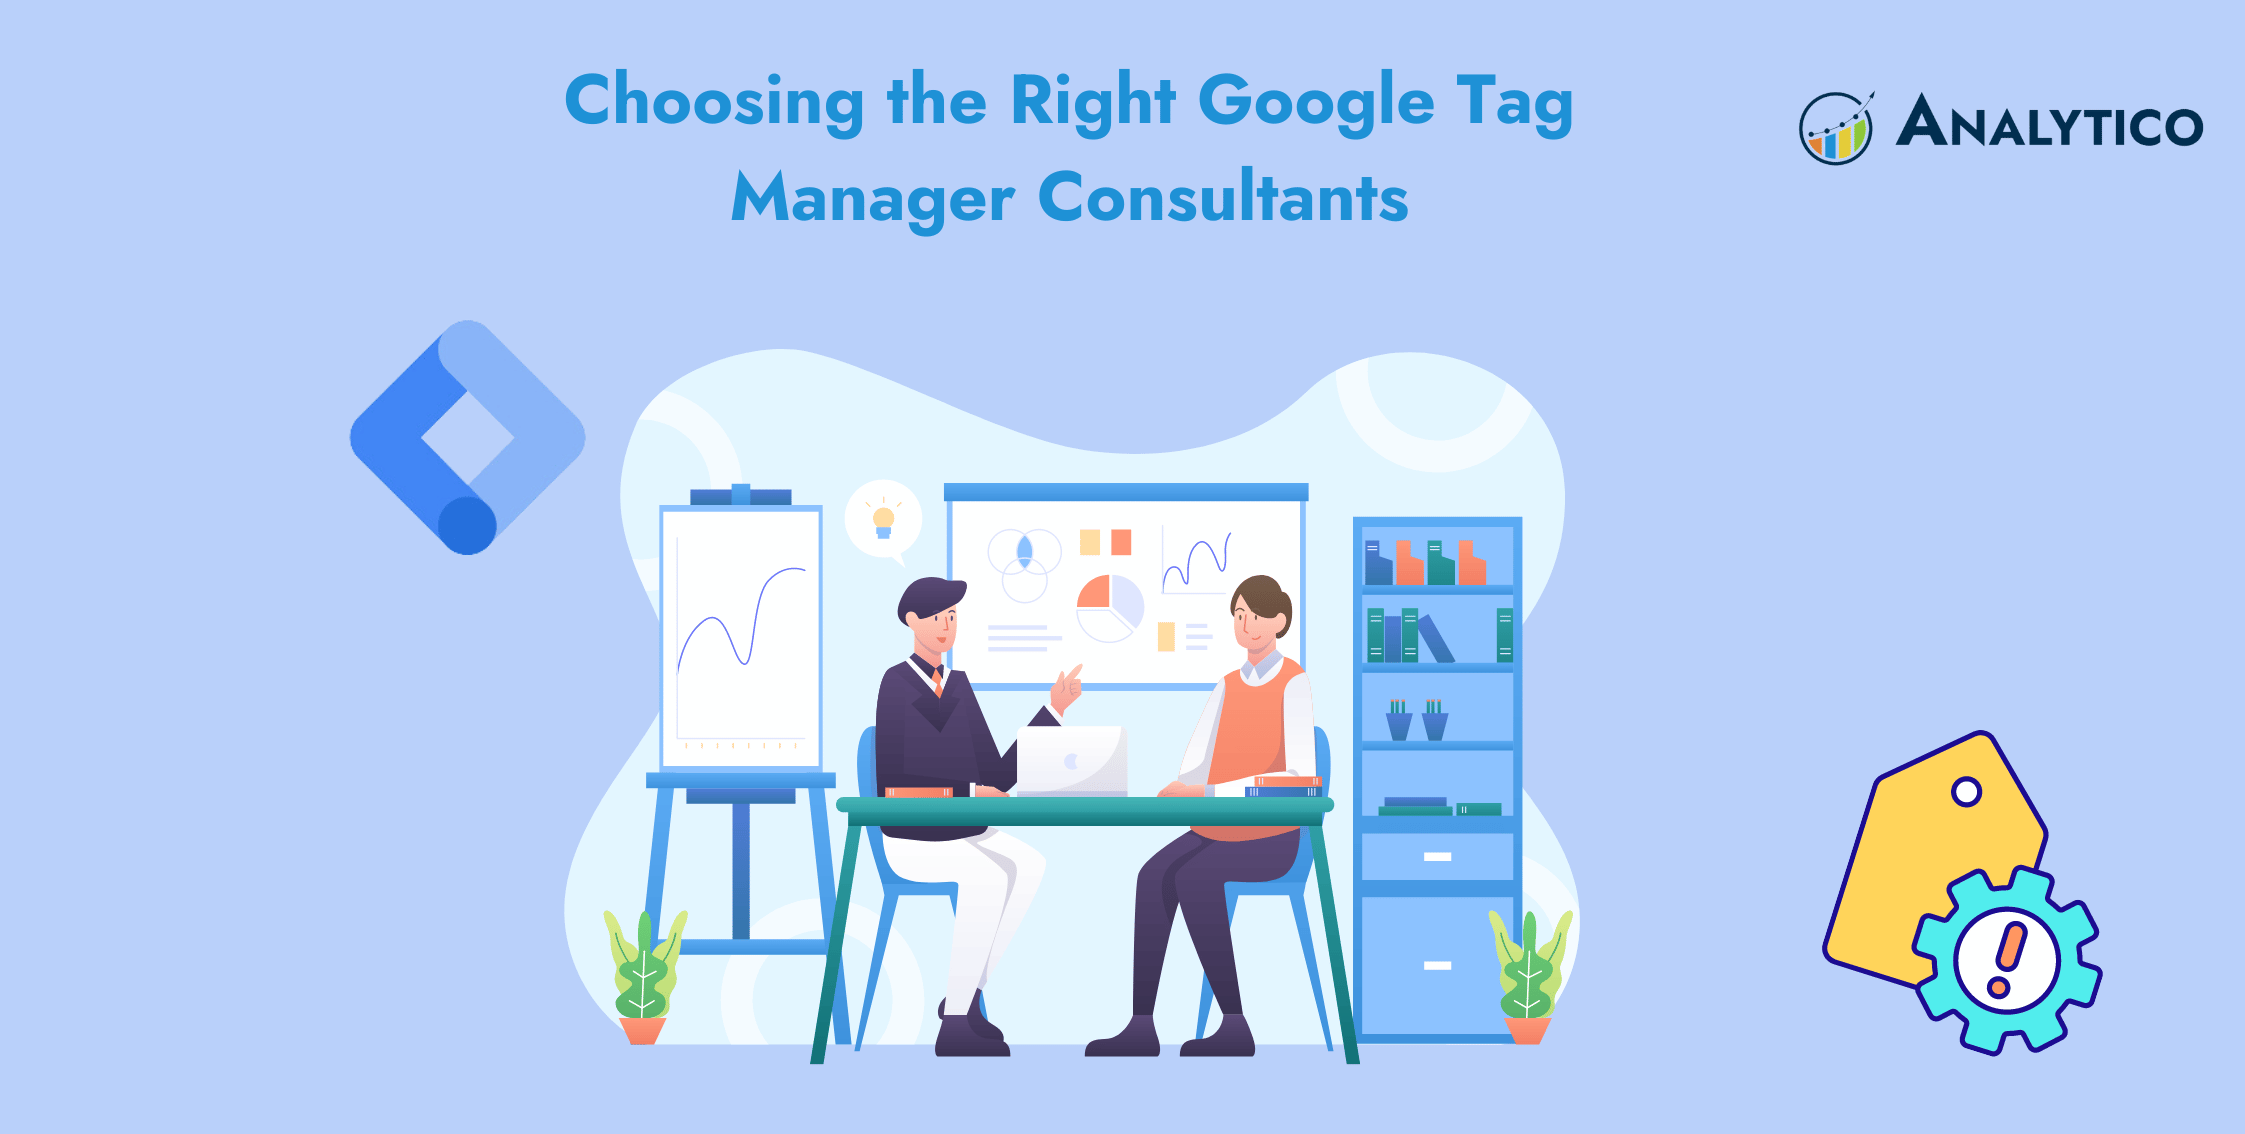 Choosing the Right Google Tag Manager Consultants: Factors to Consider